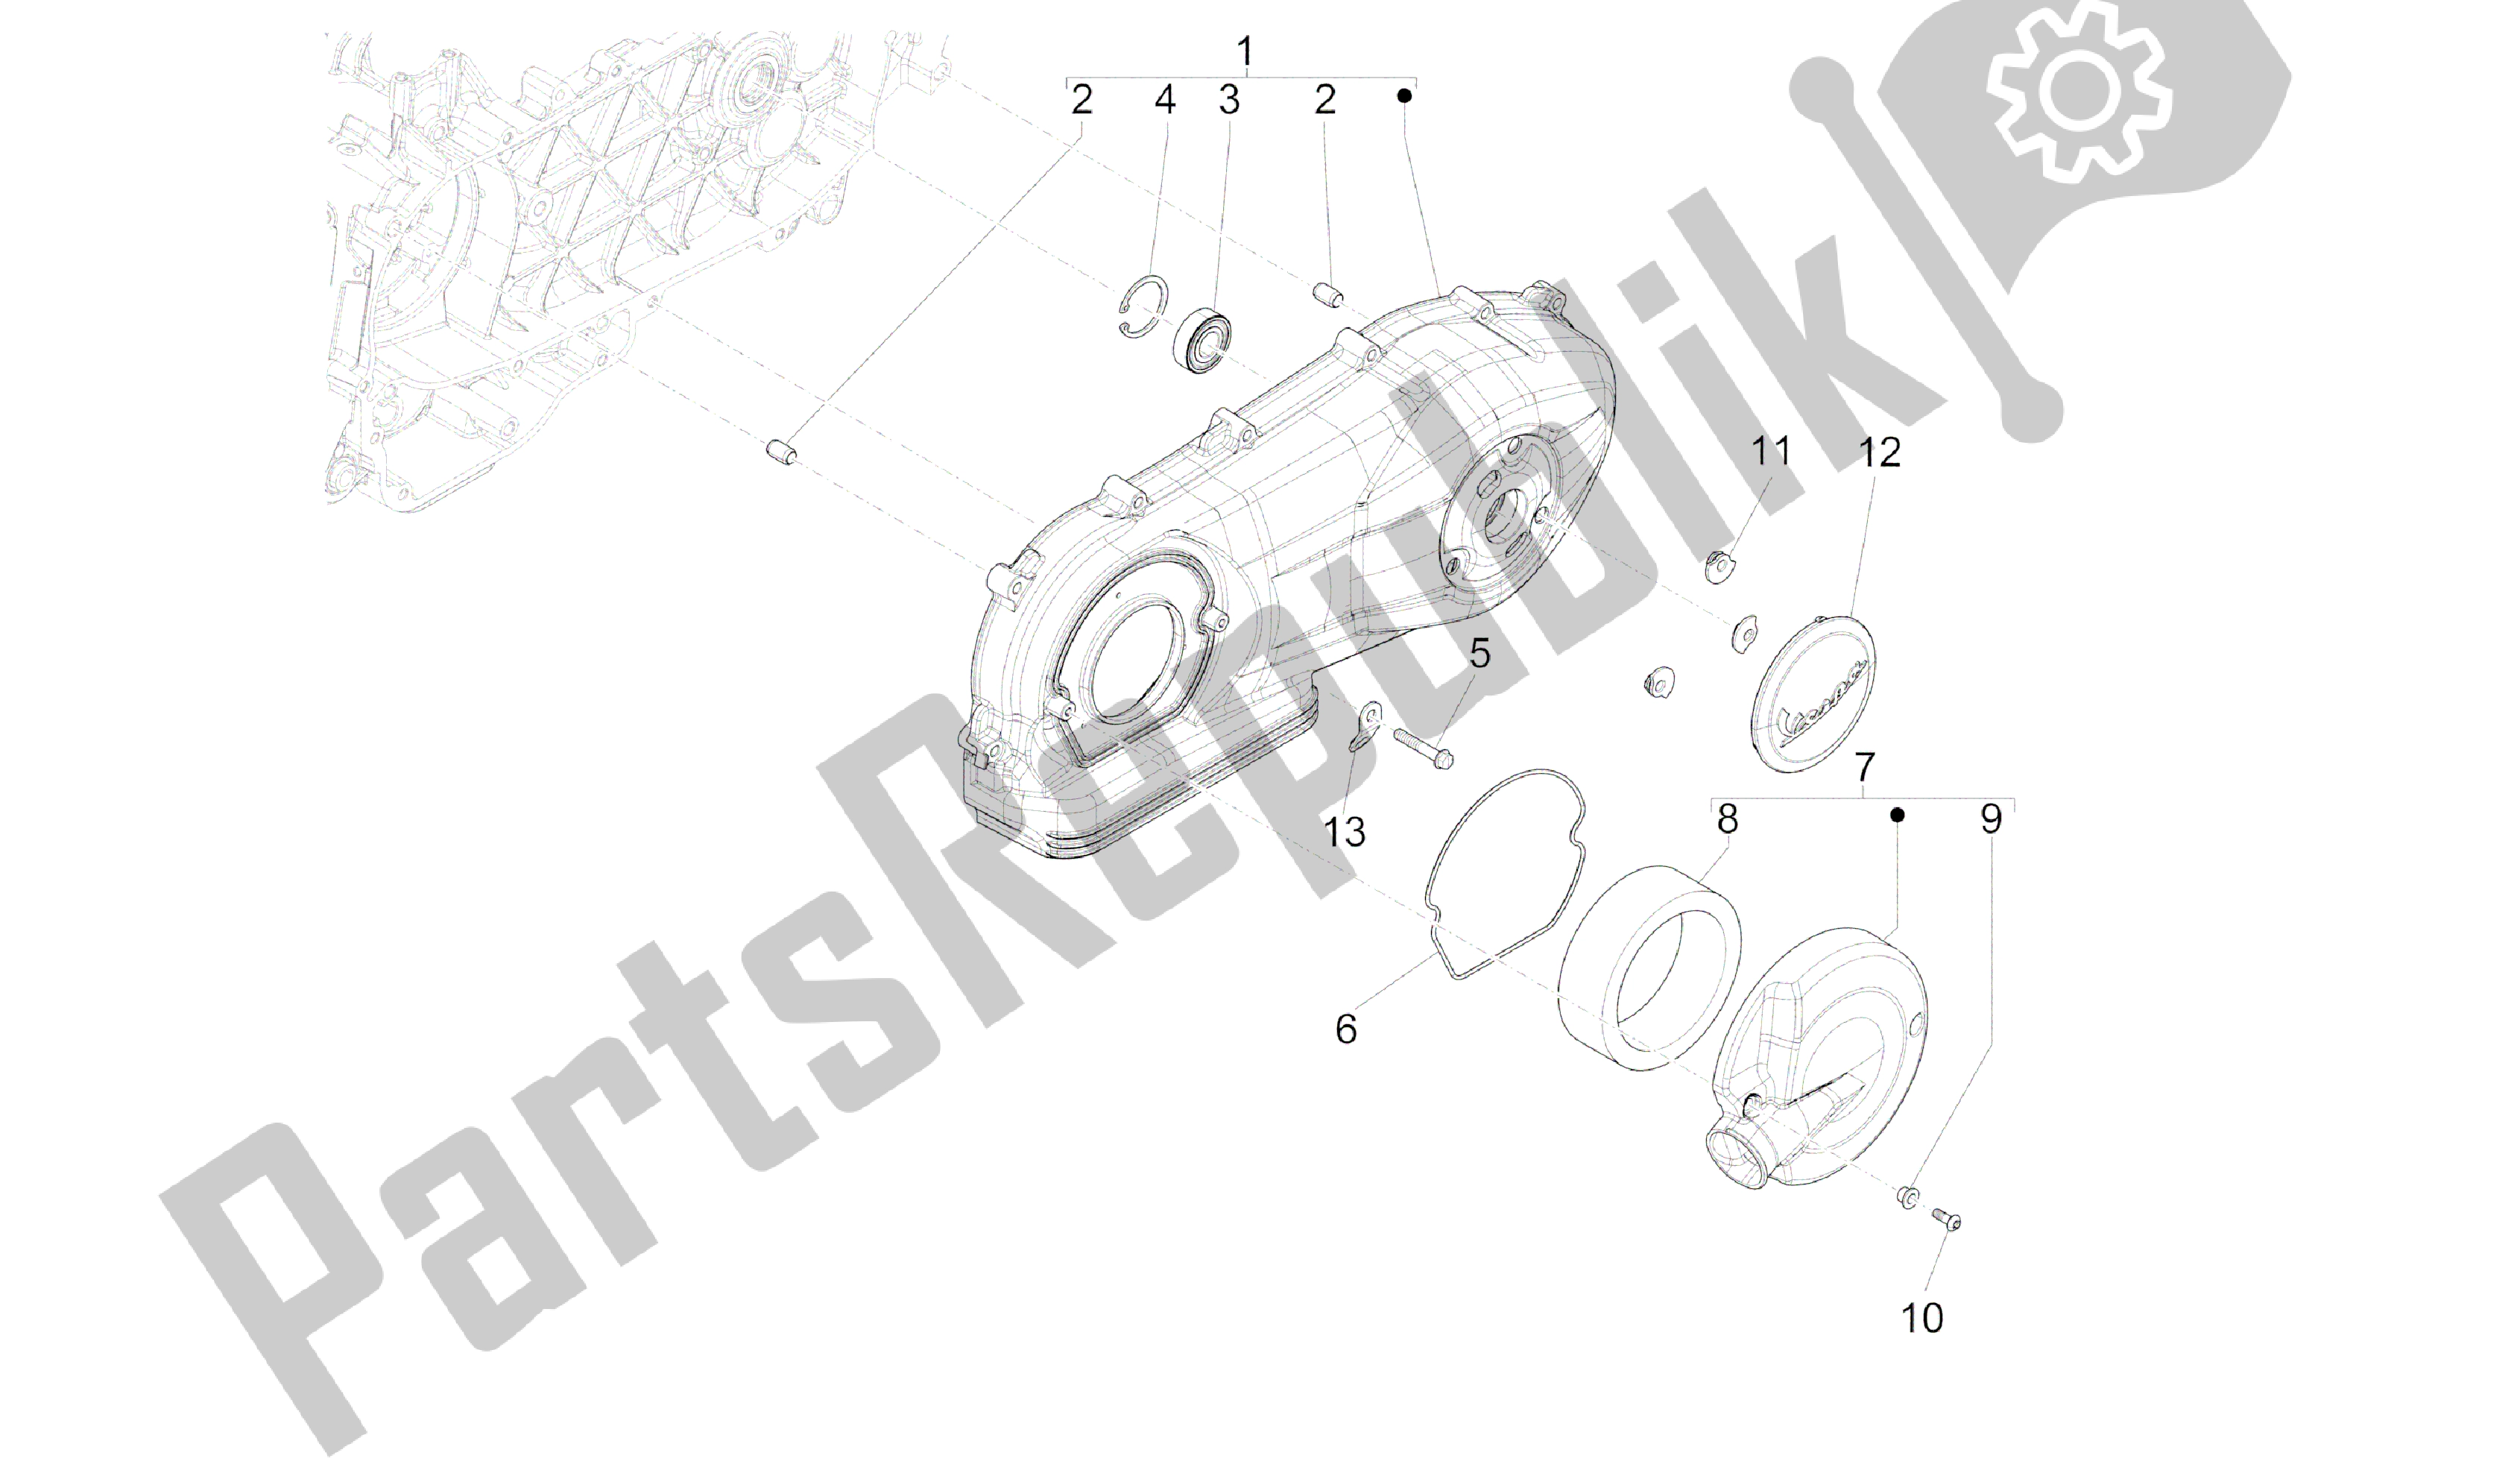 All parts for the Crankcase Cover - Crankcase Cooling of the Vespa 946 150 2013 - 2014